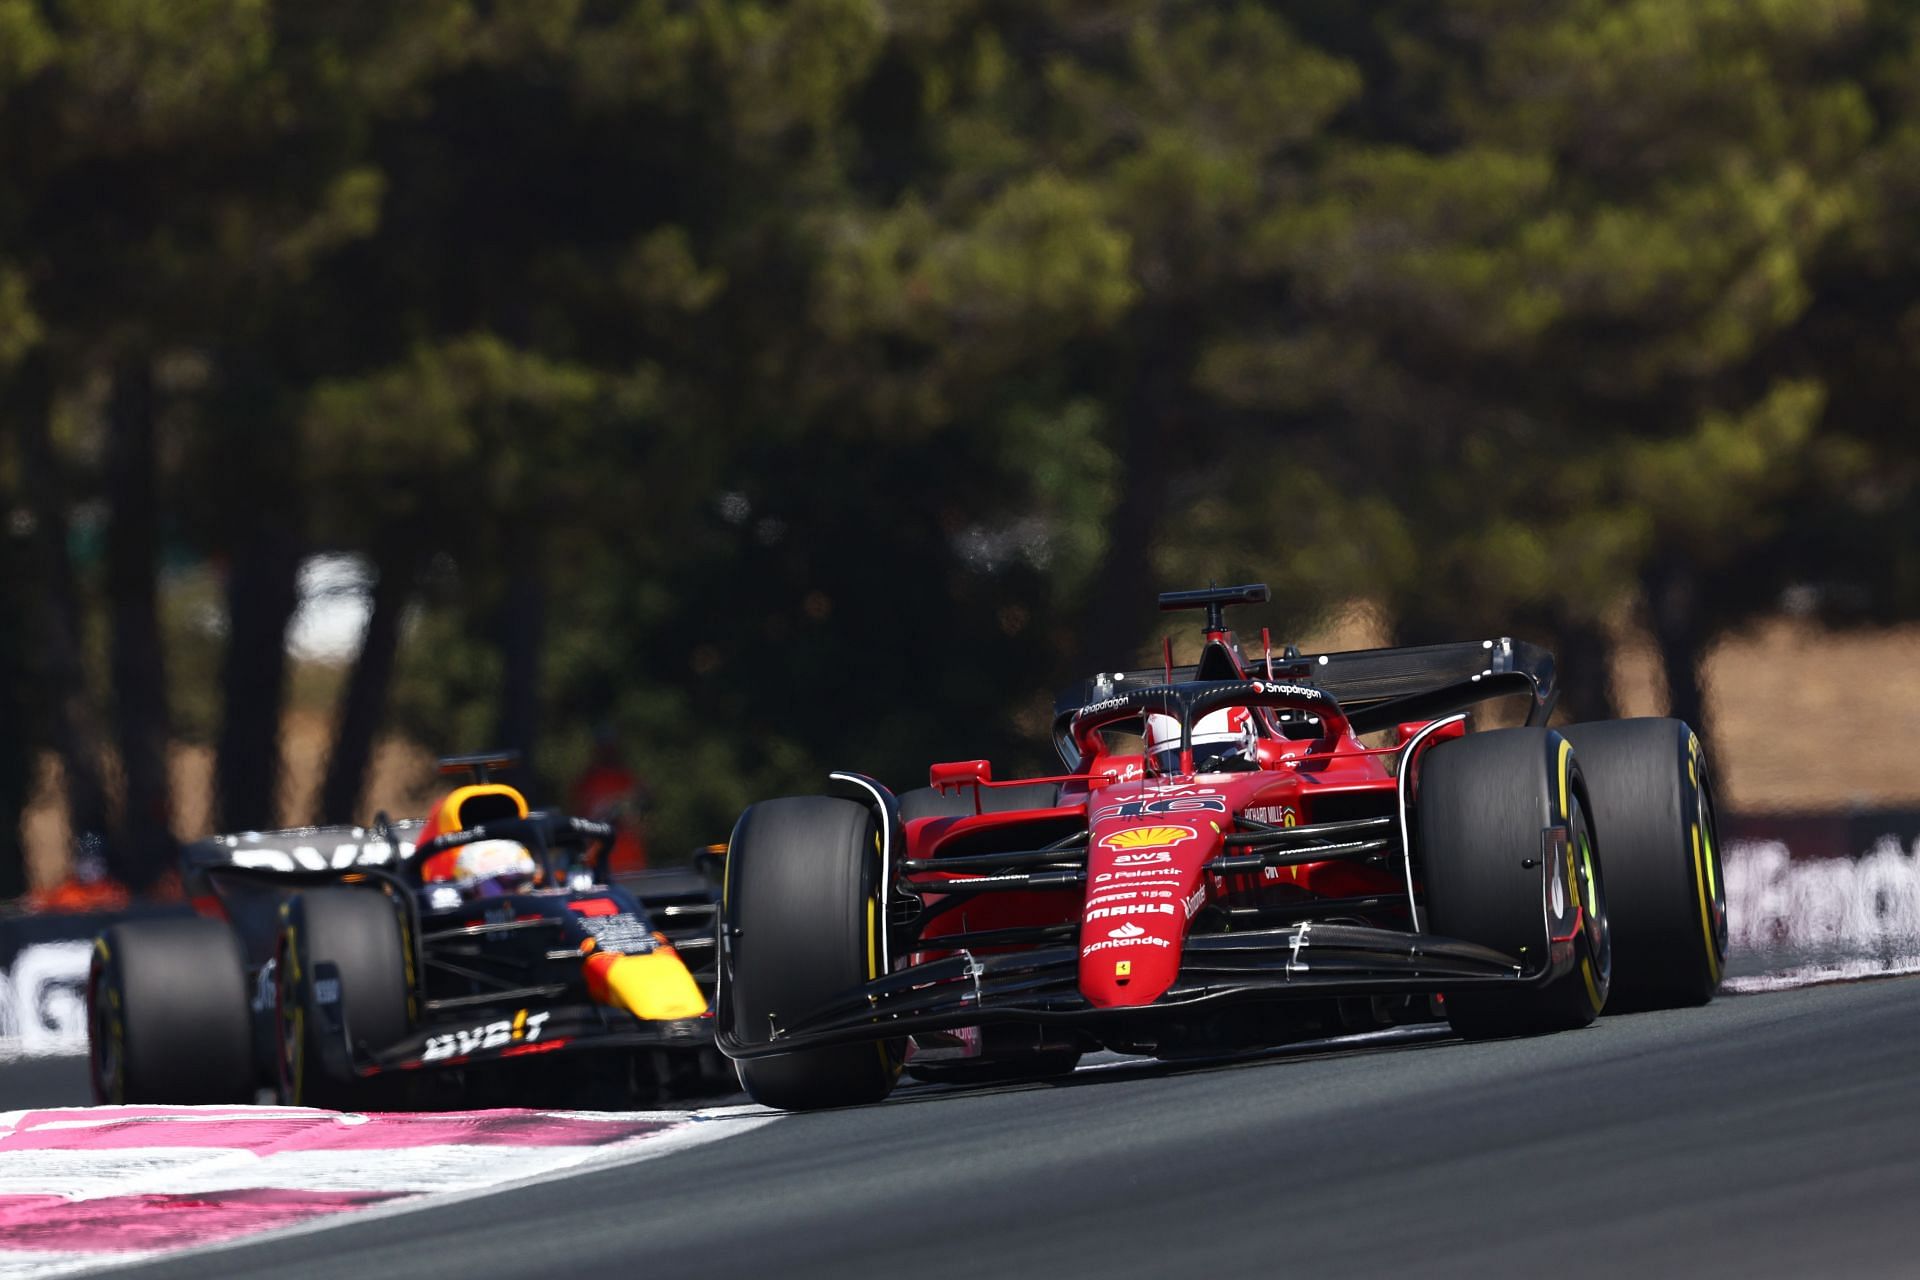 Charles Leclerc at the 2022 French Grand Prix. (Photo by Clive Rose/Getty Images)